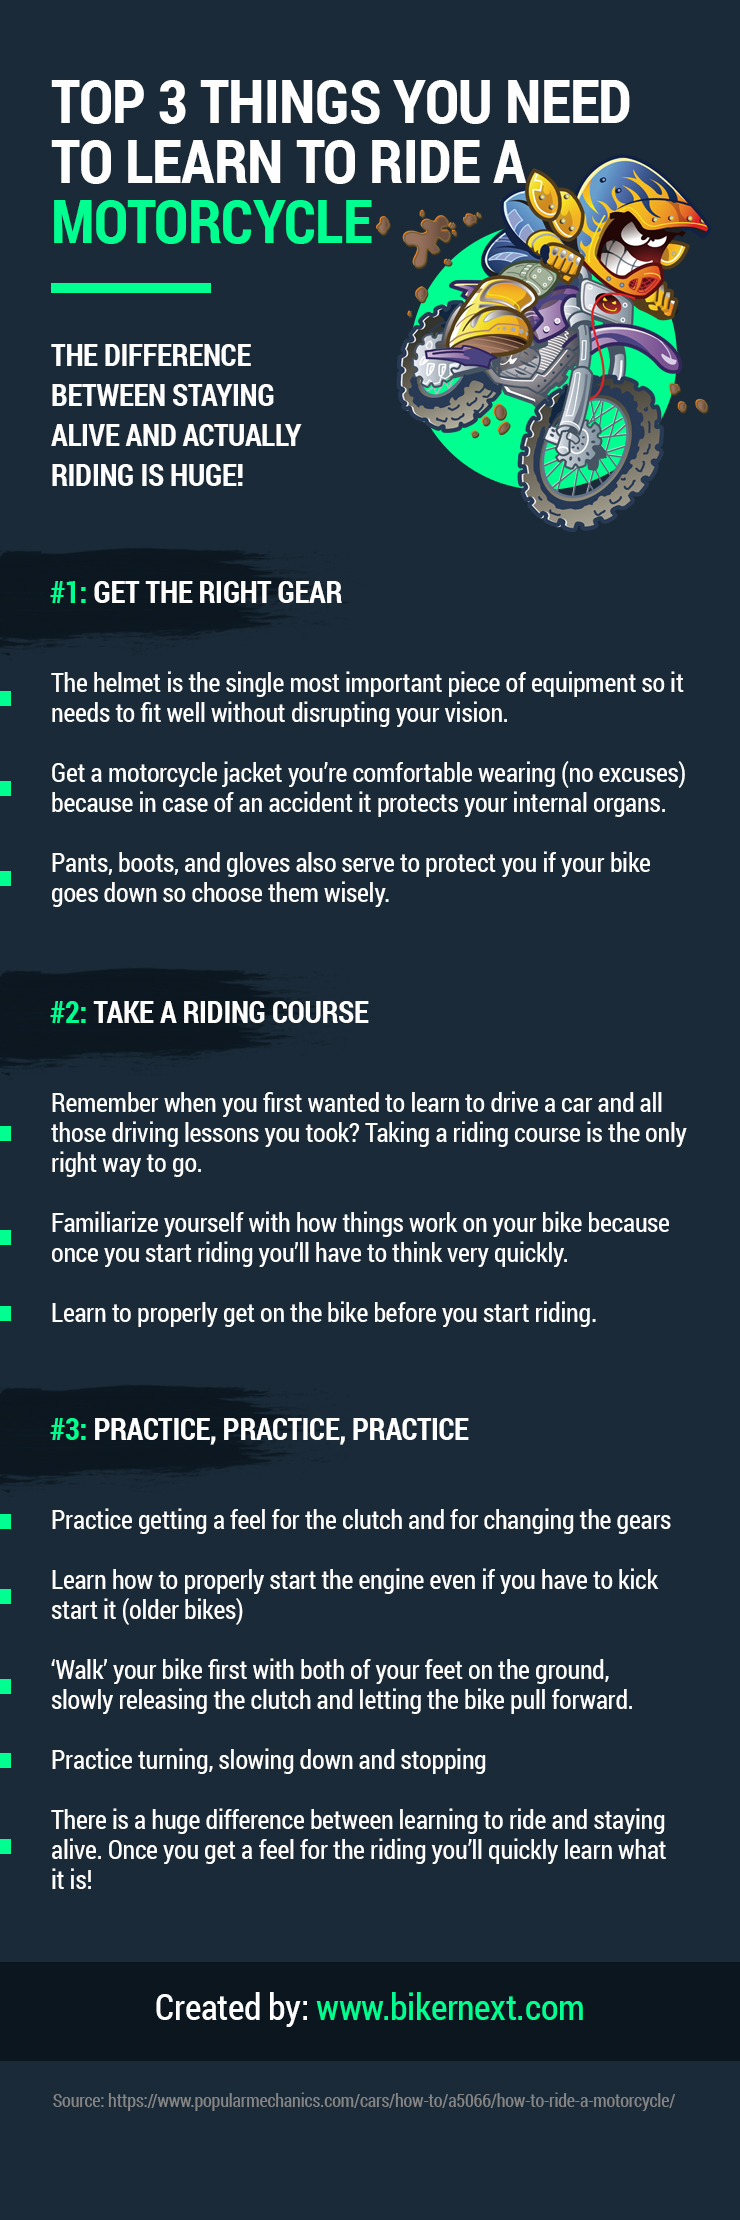 Top 3 Things You Need to Learn to Ride a Motorcycle